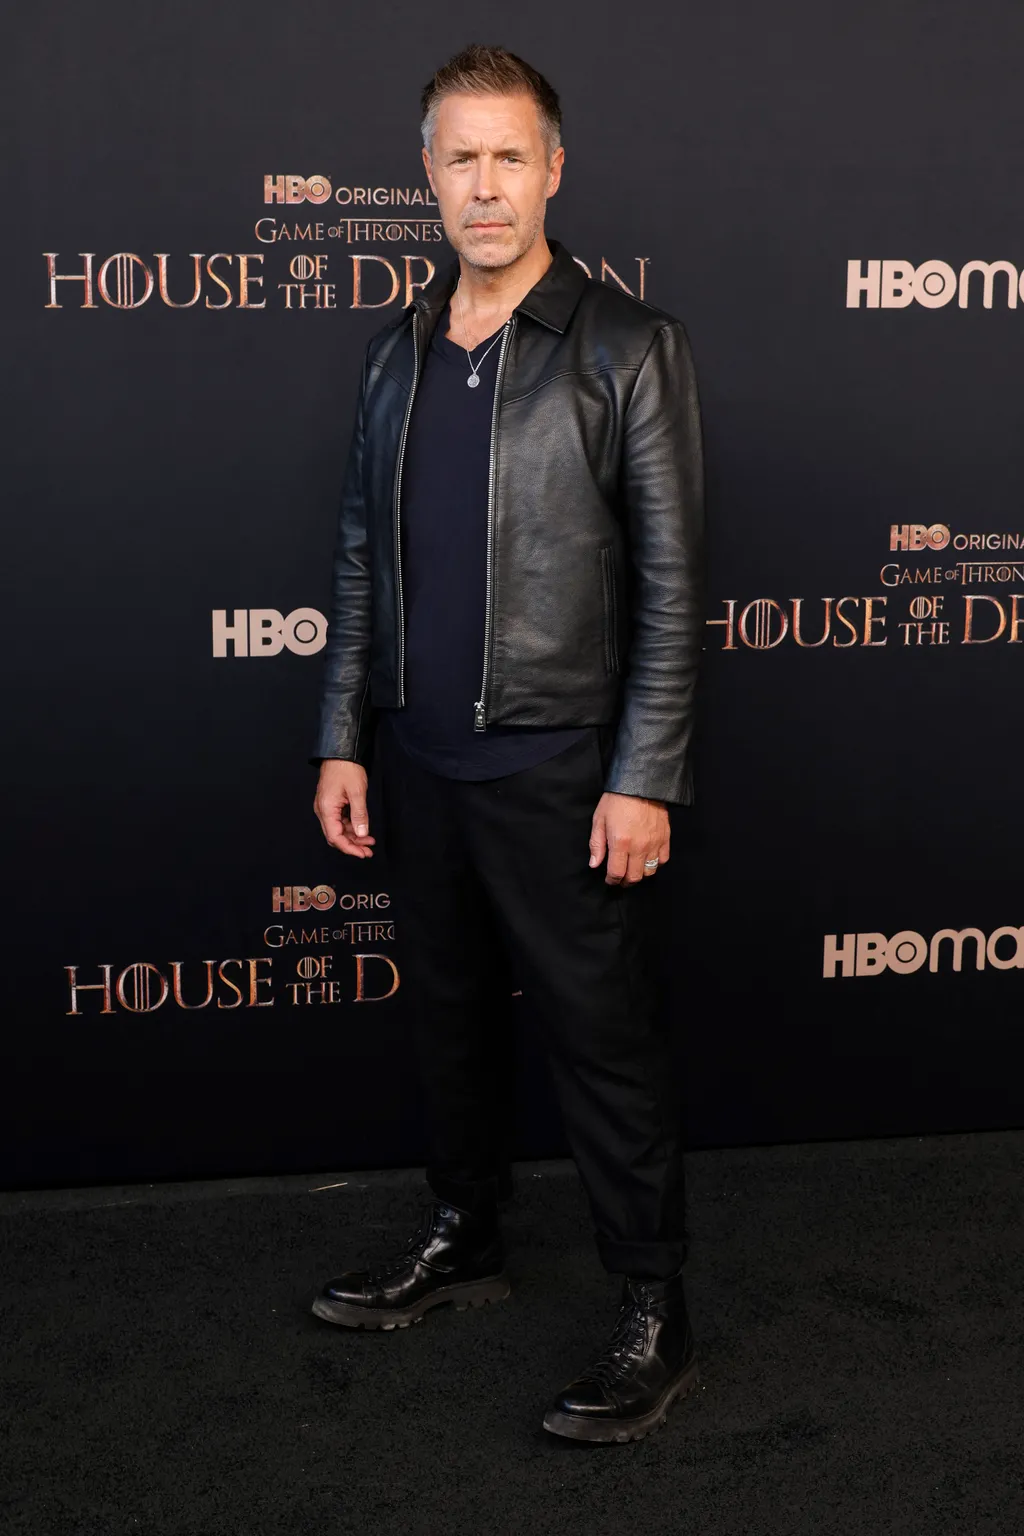 HBO Original Drama Series "House Of The Dragon" World Premiere - Arrivals GettyImageRank1 People Looking At Camera Full Length Theatrical Performance USA California City Of Los Angeles One Person Premiere Event Photography Paddy Considine Arts Culture and